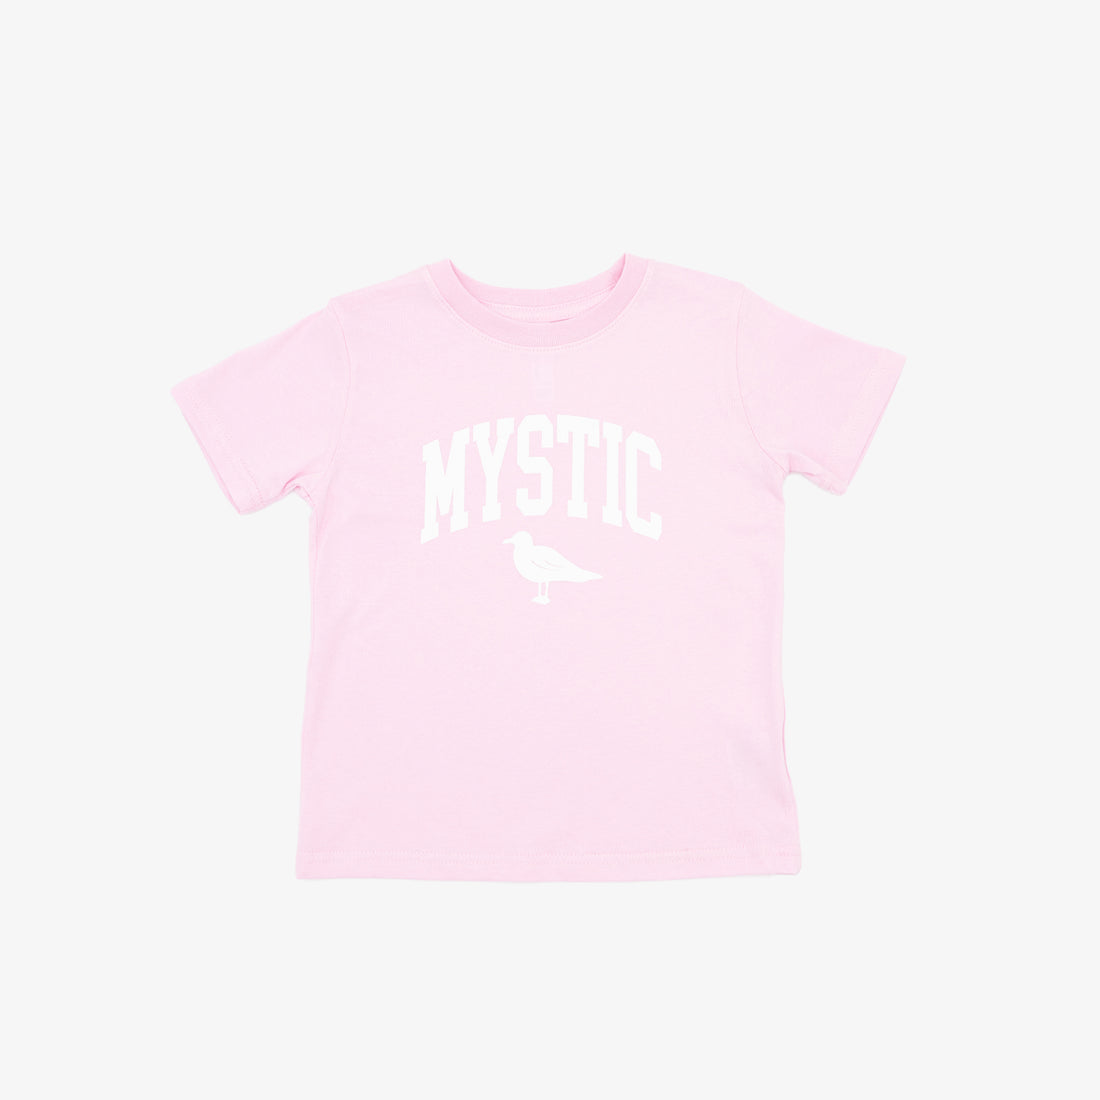 Sparpreis Youth & Kids Apparel from – Mystic Just Mystic Just Brand